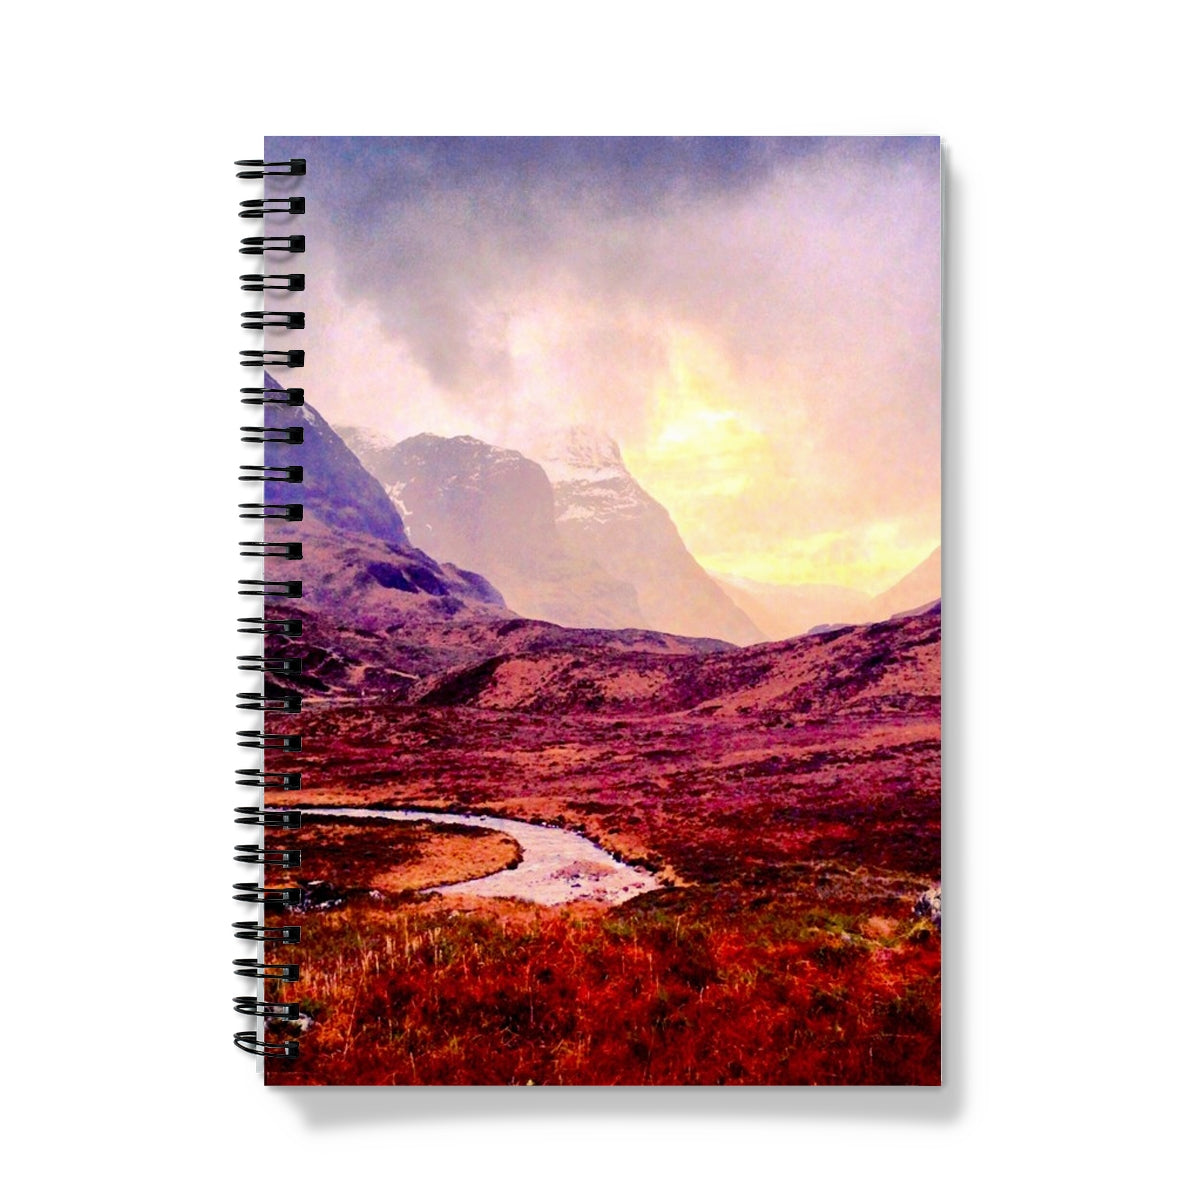 A Brooding Glencoe Art Gifts Notebook-Journals & Notebooks-Glencoe Art Gallery-A5-Lined-Paintings, Prints, Homeware, Art Gifts From Scotland By Scottish Artist Kevin Hunter